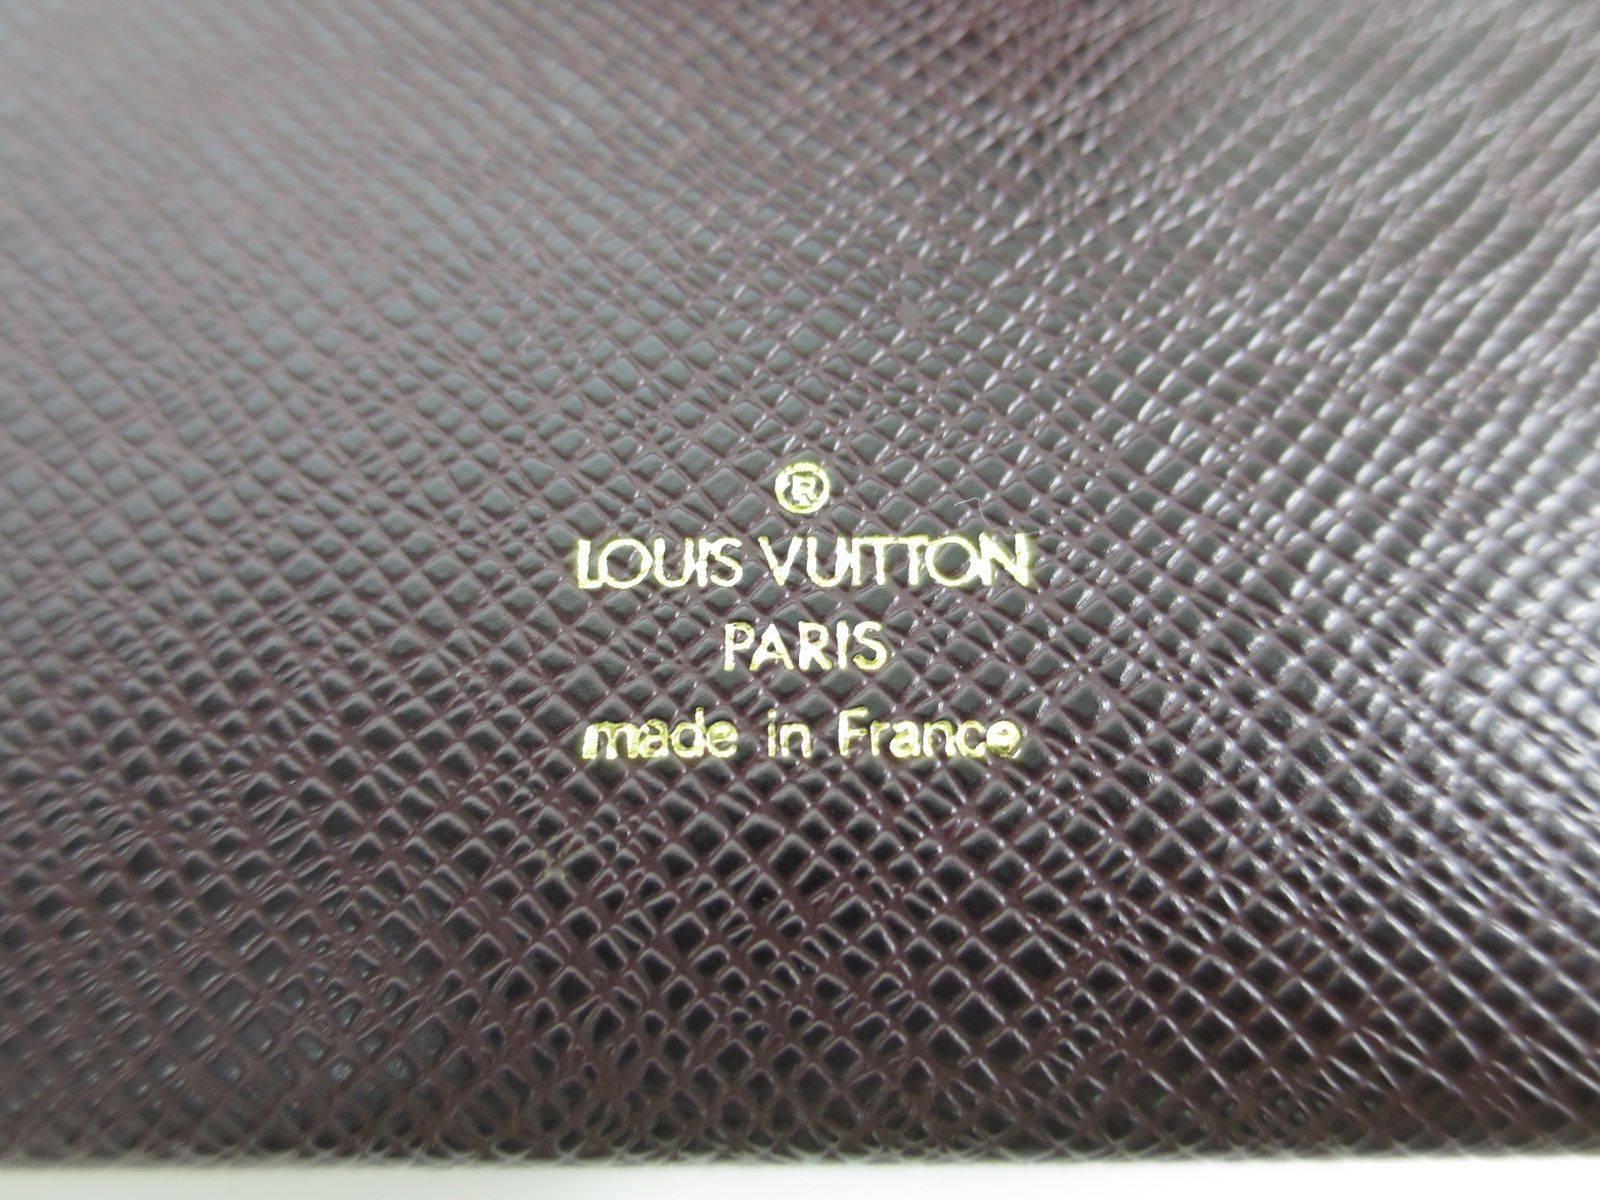 CURAOR'S NOTES

The perfect gift: Louis Vuitton four-piece stationery desk set with the original Louis Vuitton box.  This popular item will sell quickly.

Taiga leather
Made in France
Date coded
Includes original Louis Vuitton box